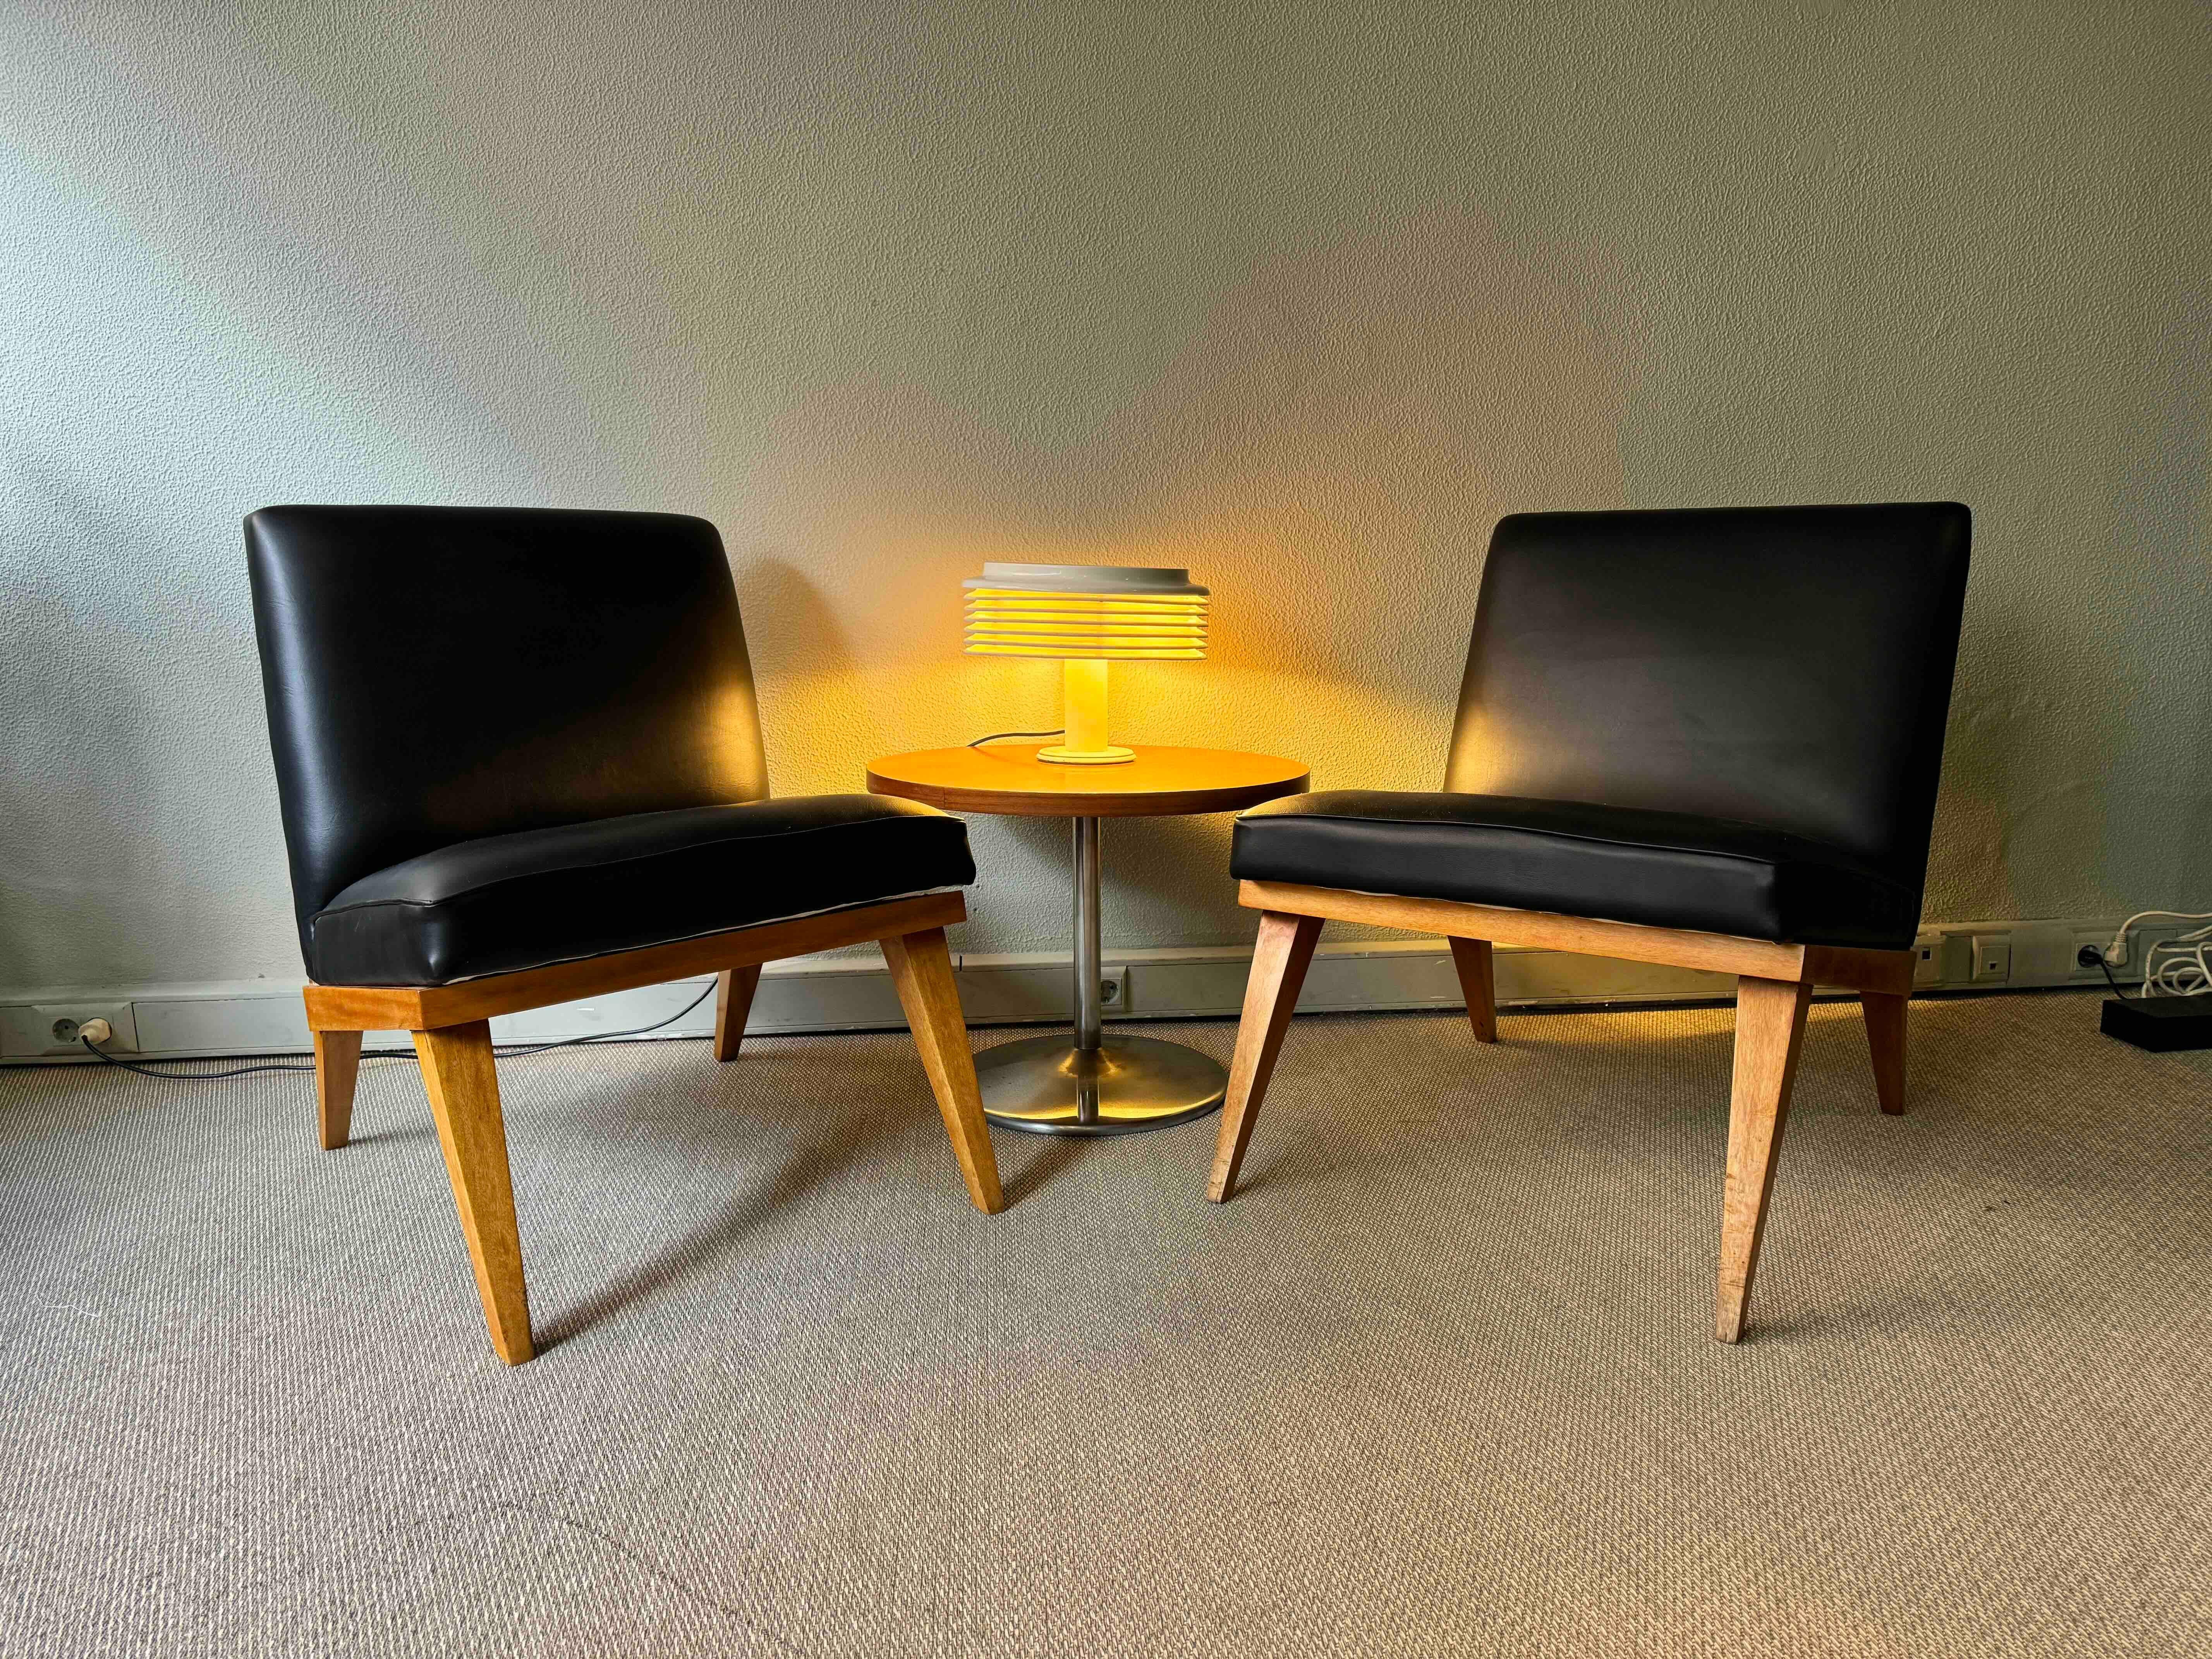 
Step into the timeless charm of mid-century design with this remarkable pair of low chairs, inspired by the iconic Jens Risom Slipper Chair style from the 1950s. What makes this pair unique is their individuality; one chair offers a slightly more